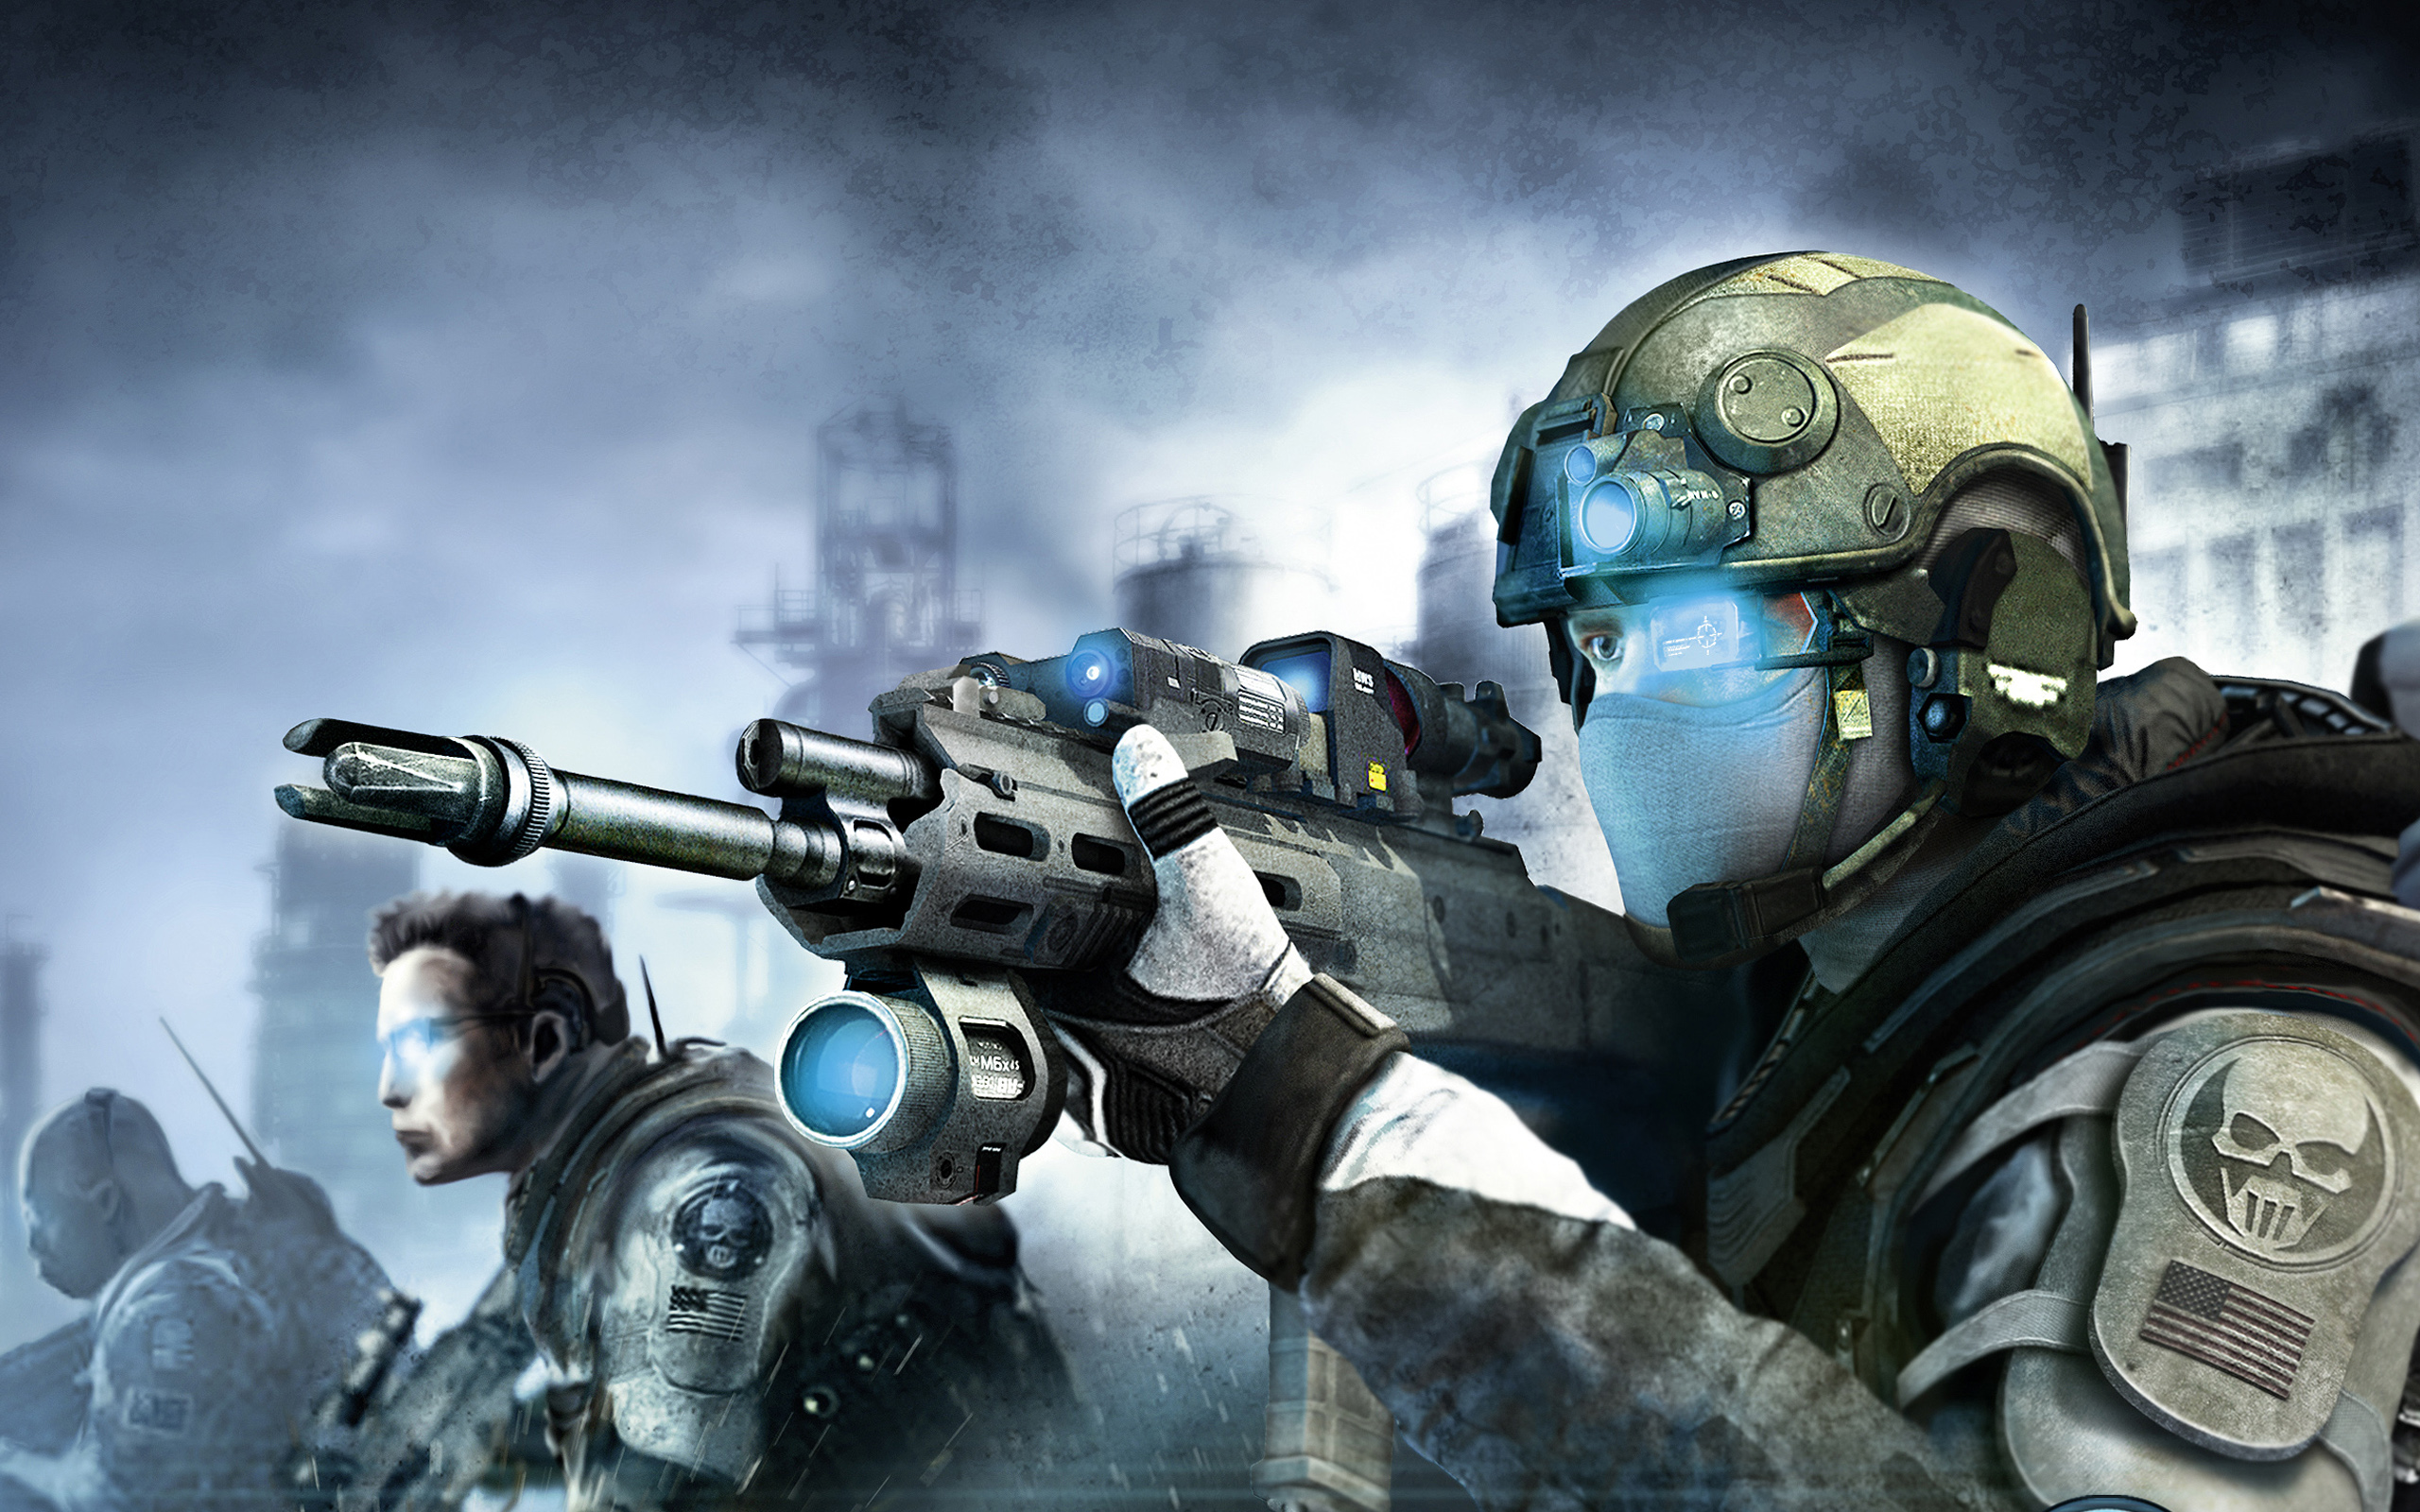  Tom Clancy's Ghost Recon Shadow Wars : Video Games